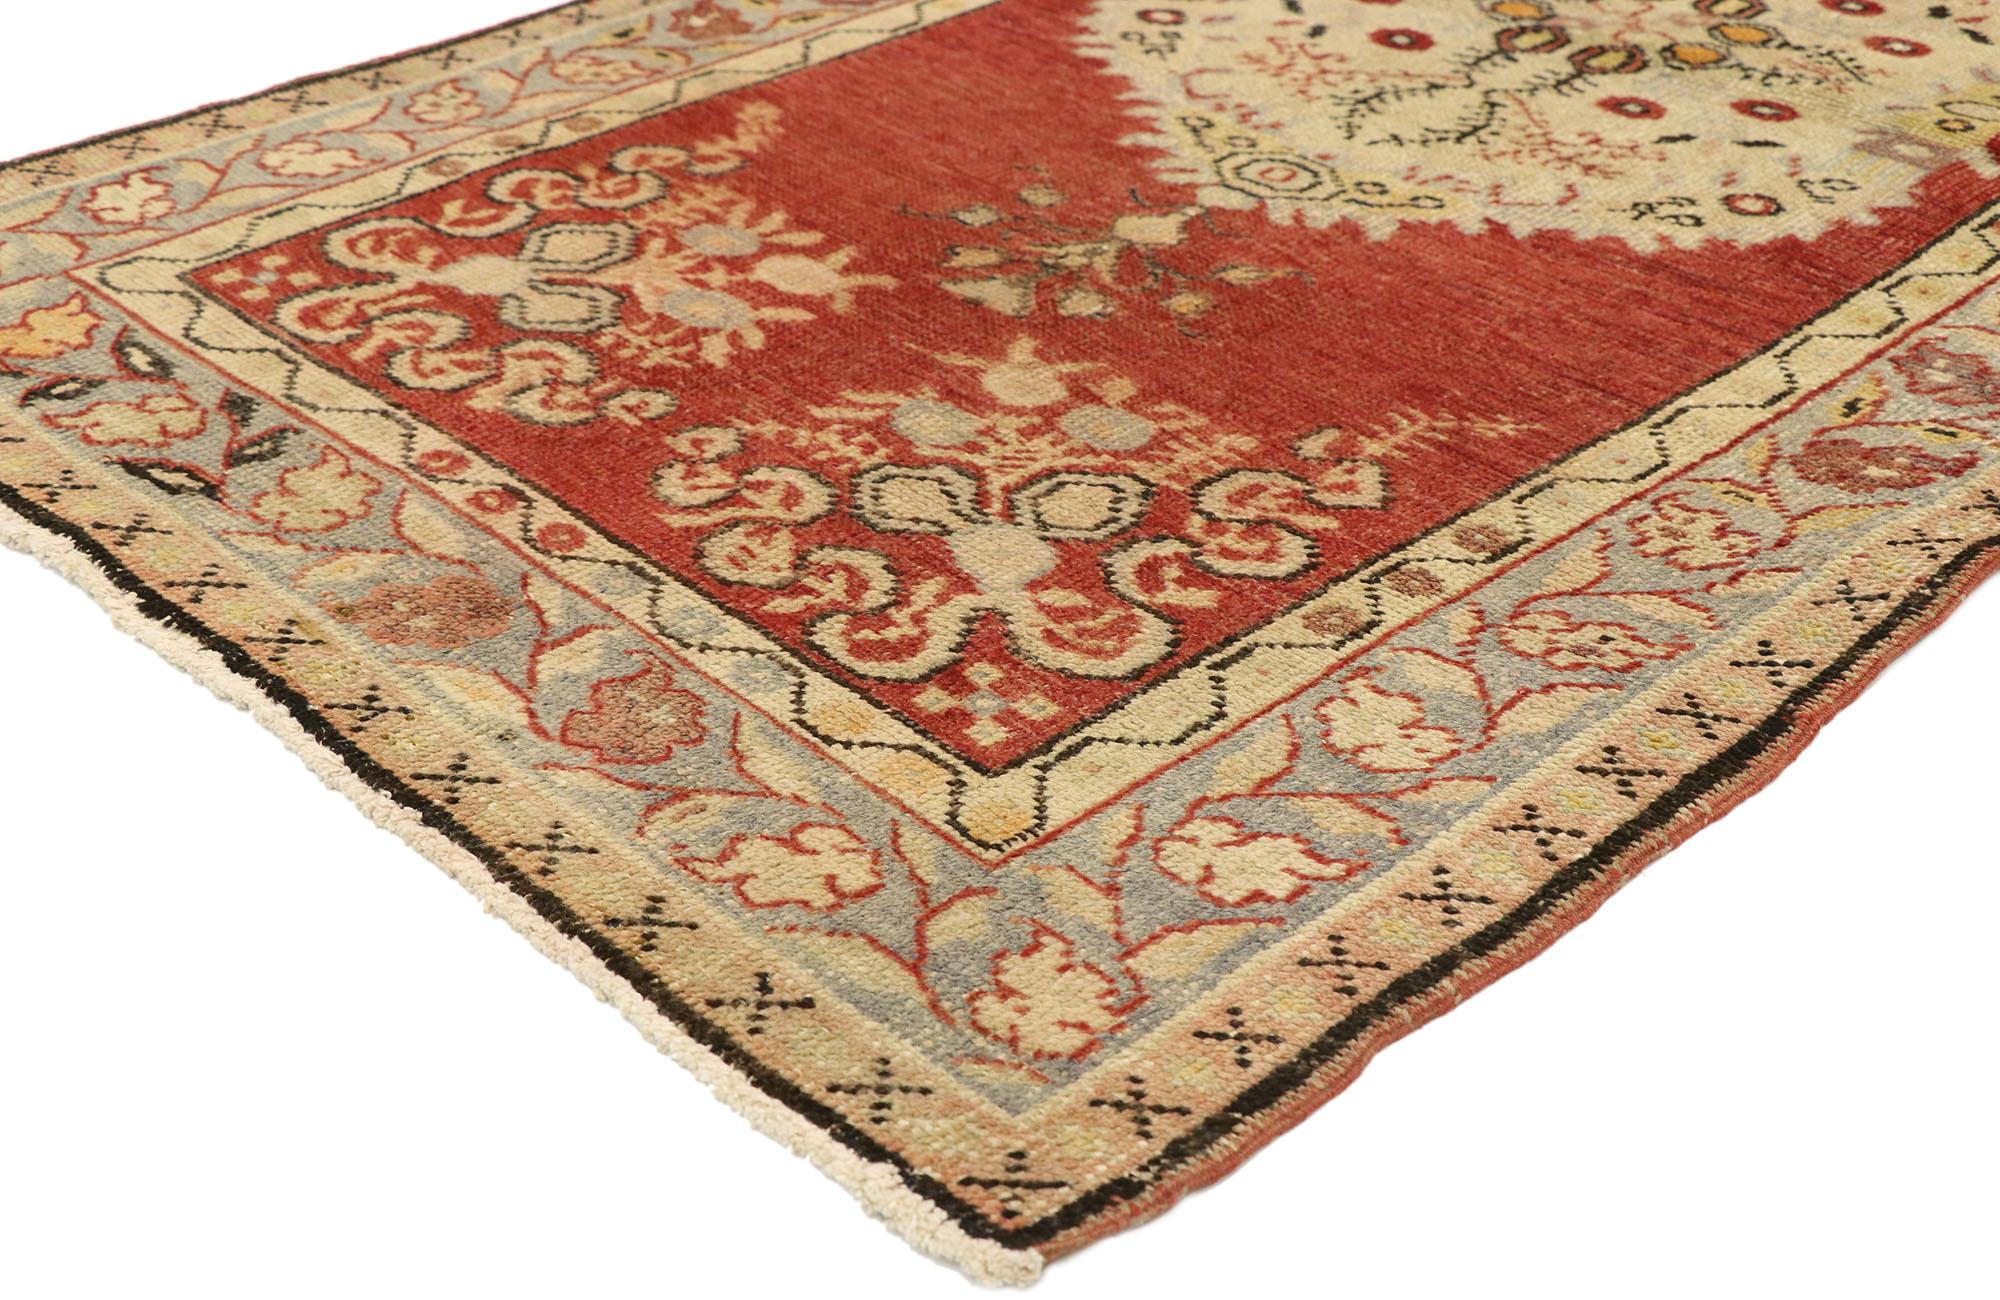 51318 Vintage Turkish Oushak Rug, 03'04 x 06'09. In this hand knotted wool vintage Turkish Oushak rug, French Rococo Romanticism gracefully blends with timeless Anatolian tradition. An elaborate round-oval medallion rests at its heart, set against